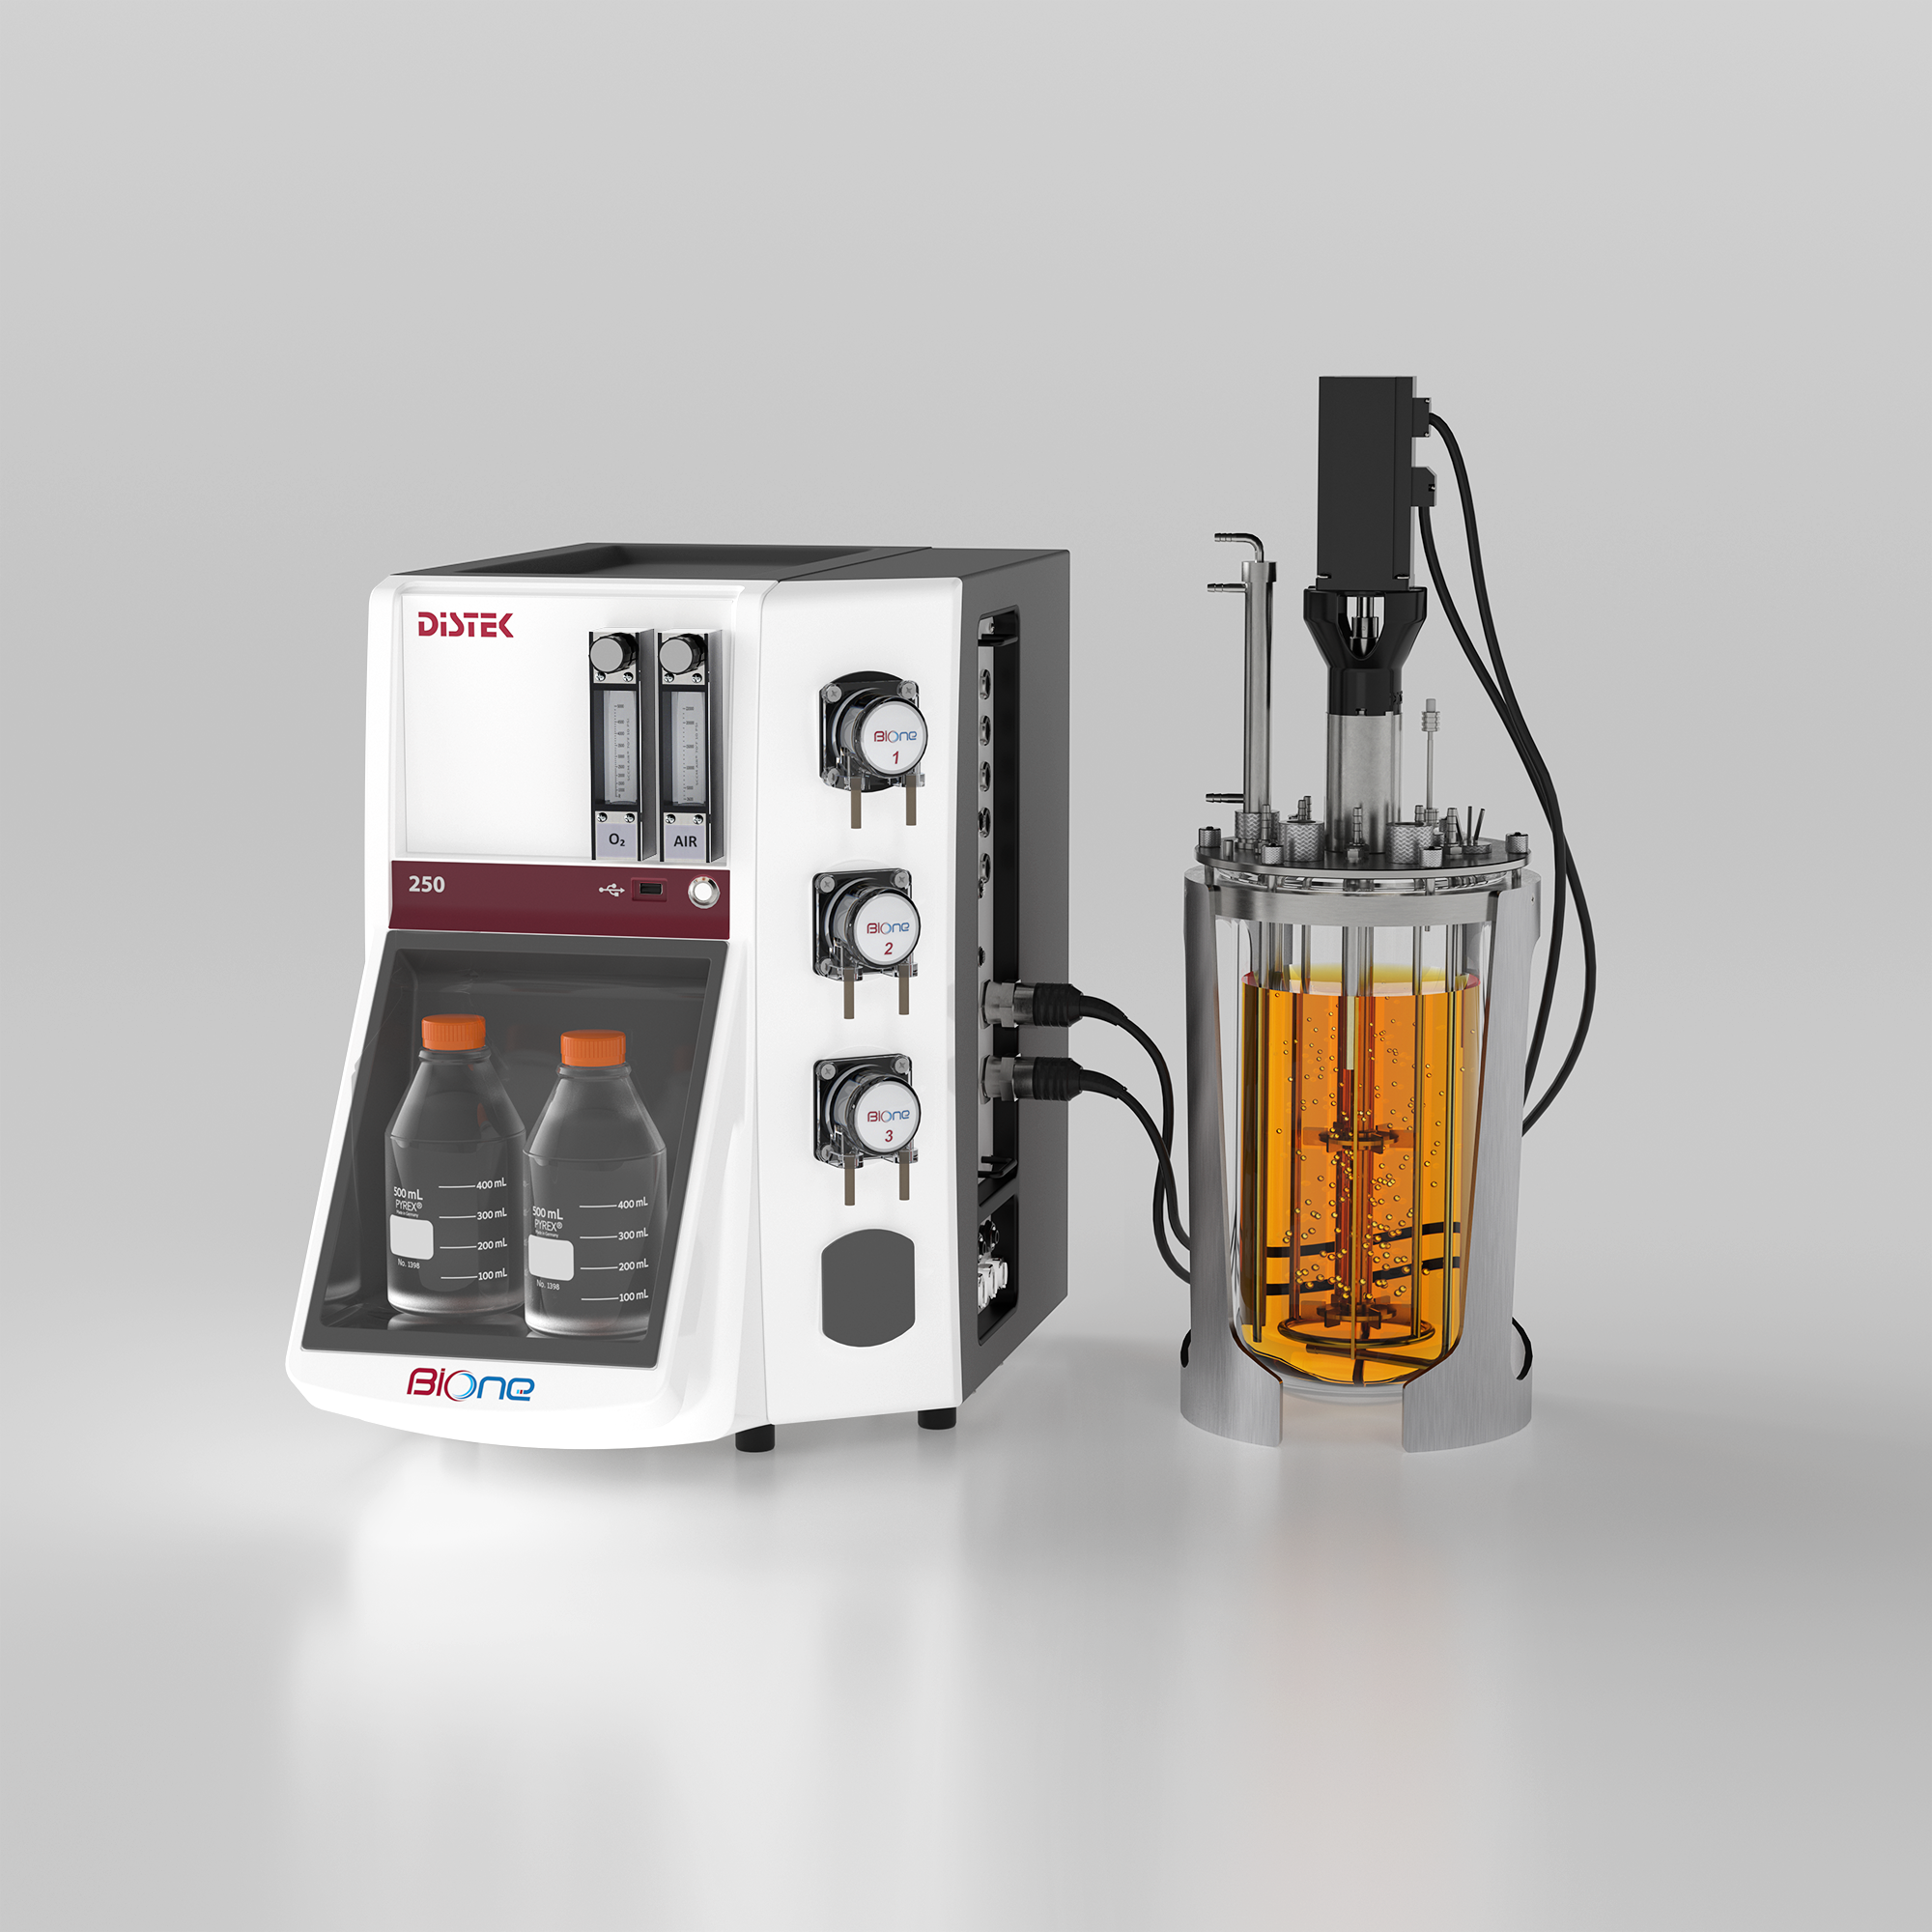 Discover the Bion 250: a budget friendly bioprocess control station for microbial applications